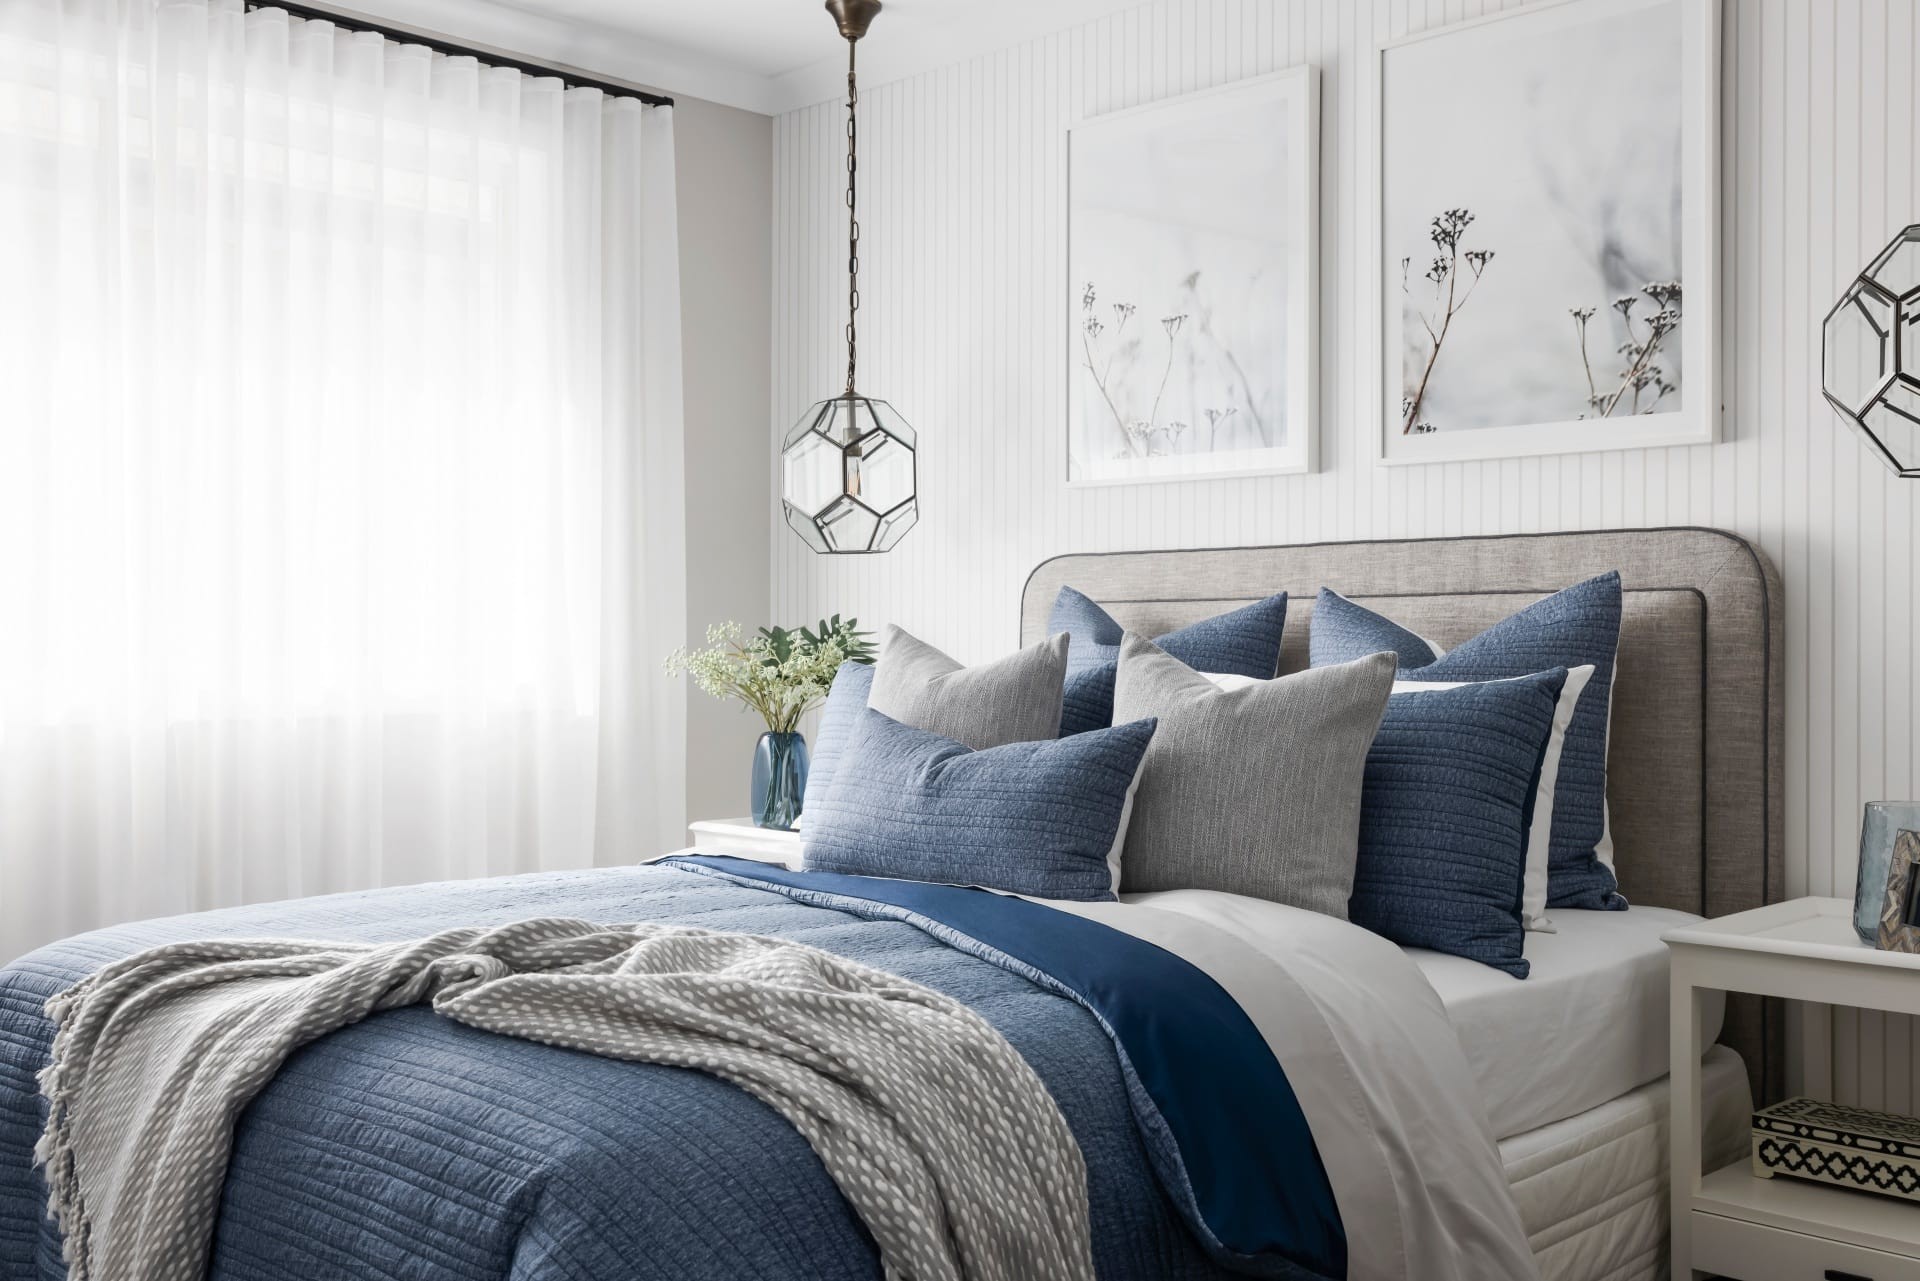 blue and white hamptons bedroom styling with glass hamptons pendant lights and stripe wallpaper